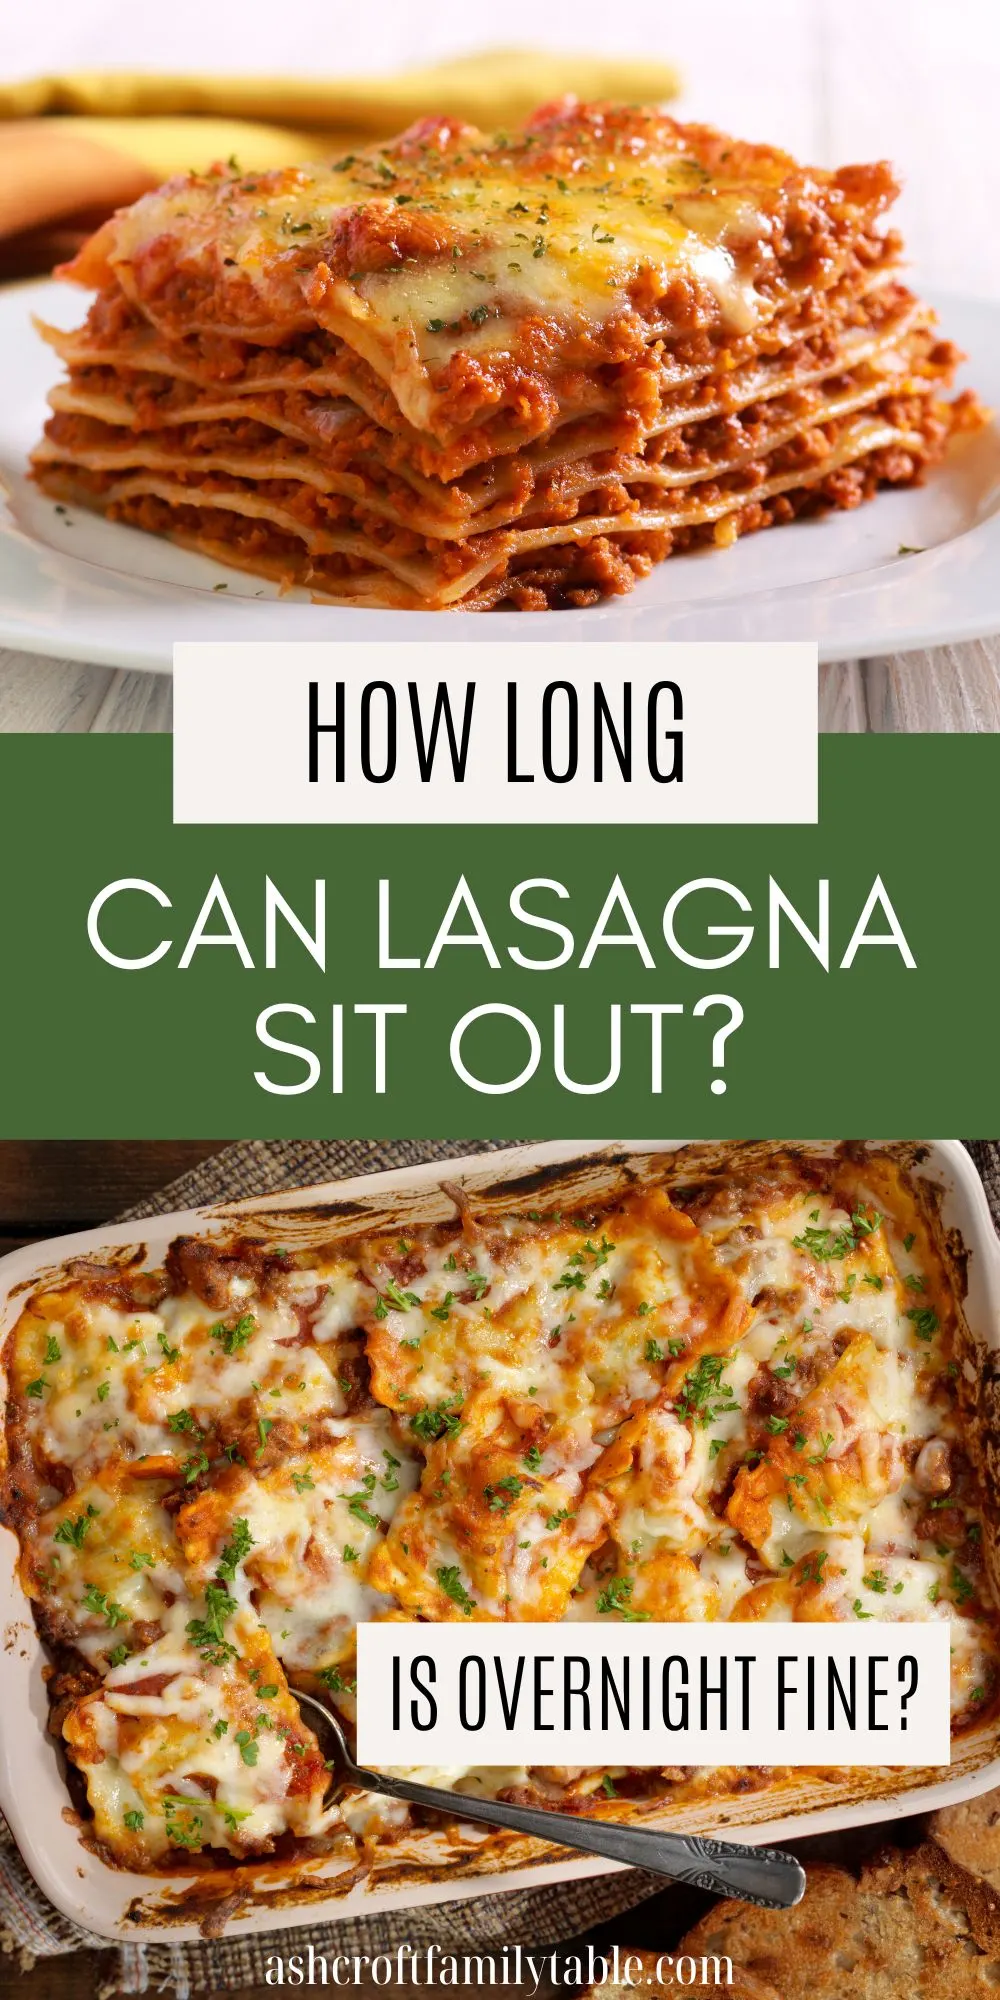 How Long Can Lasagna Sit Out?